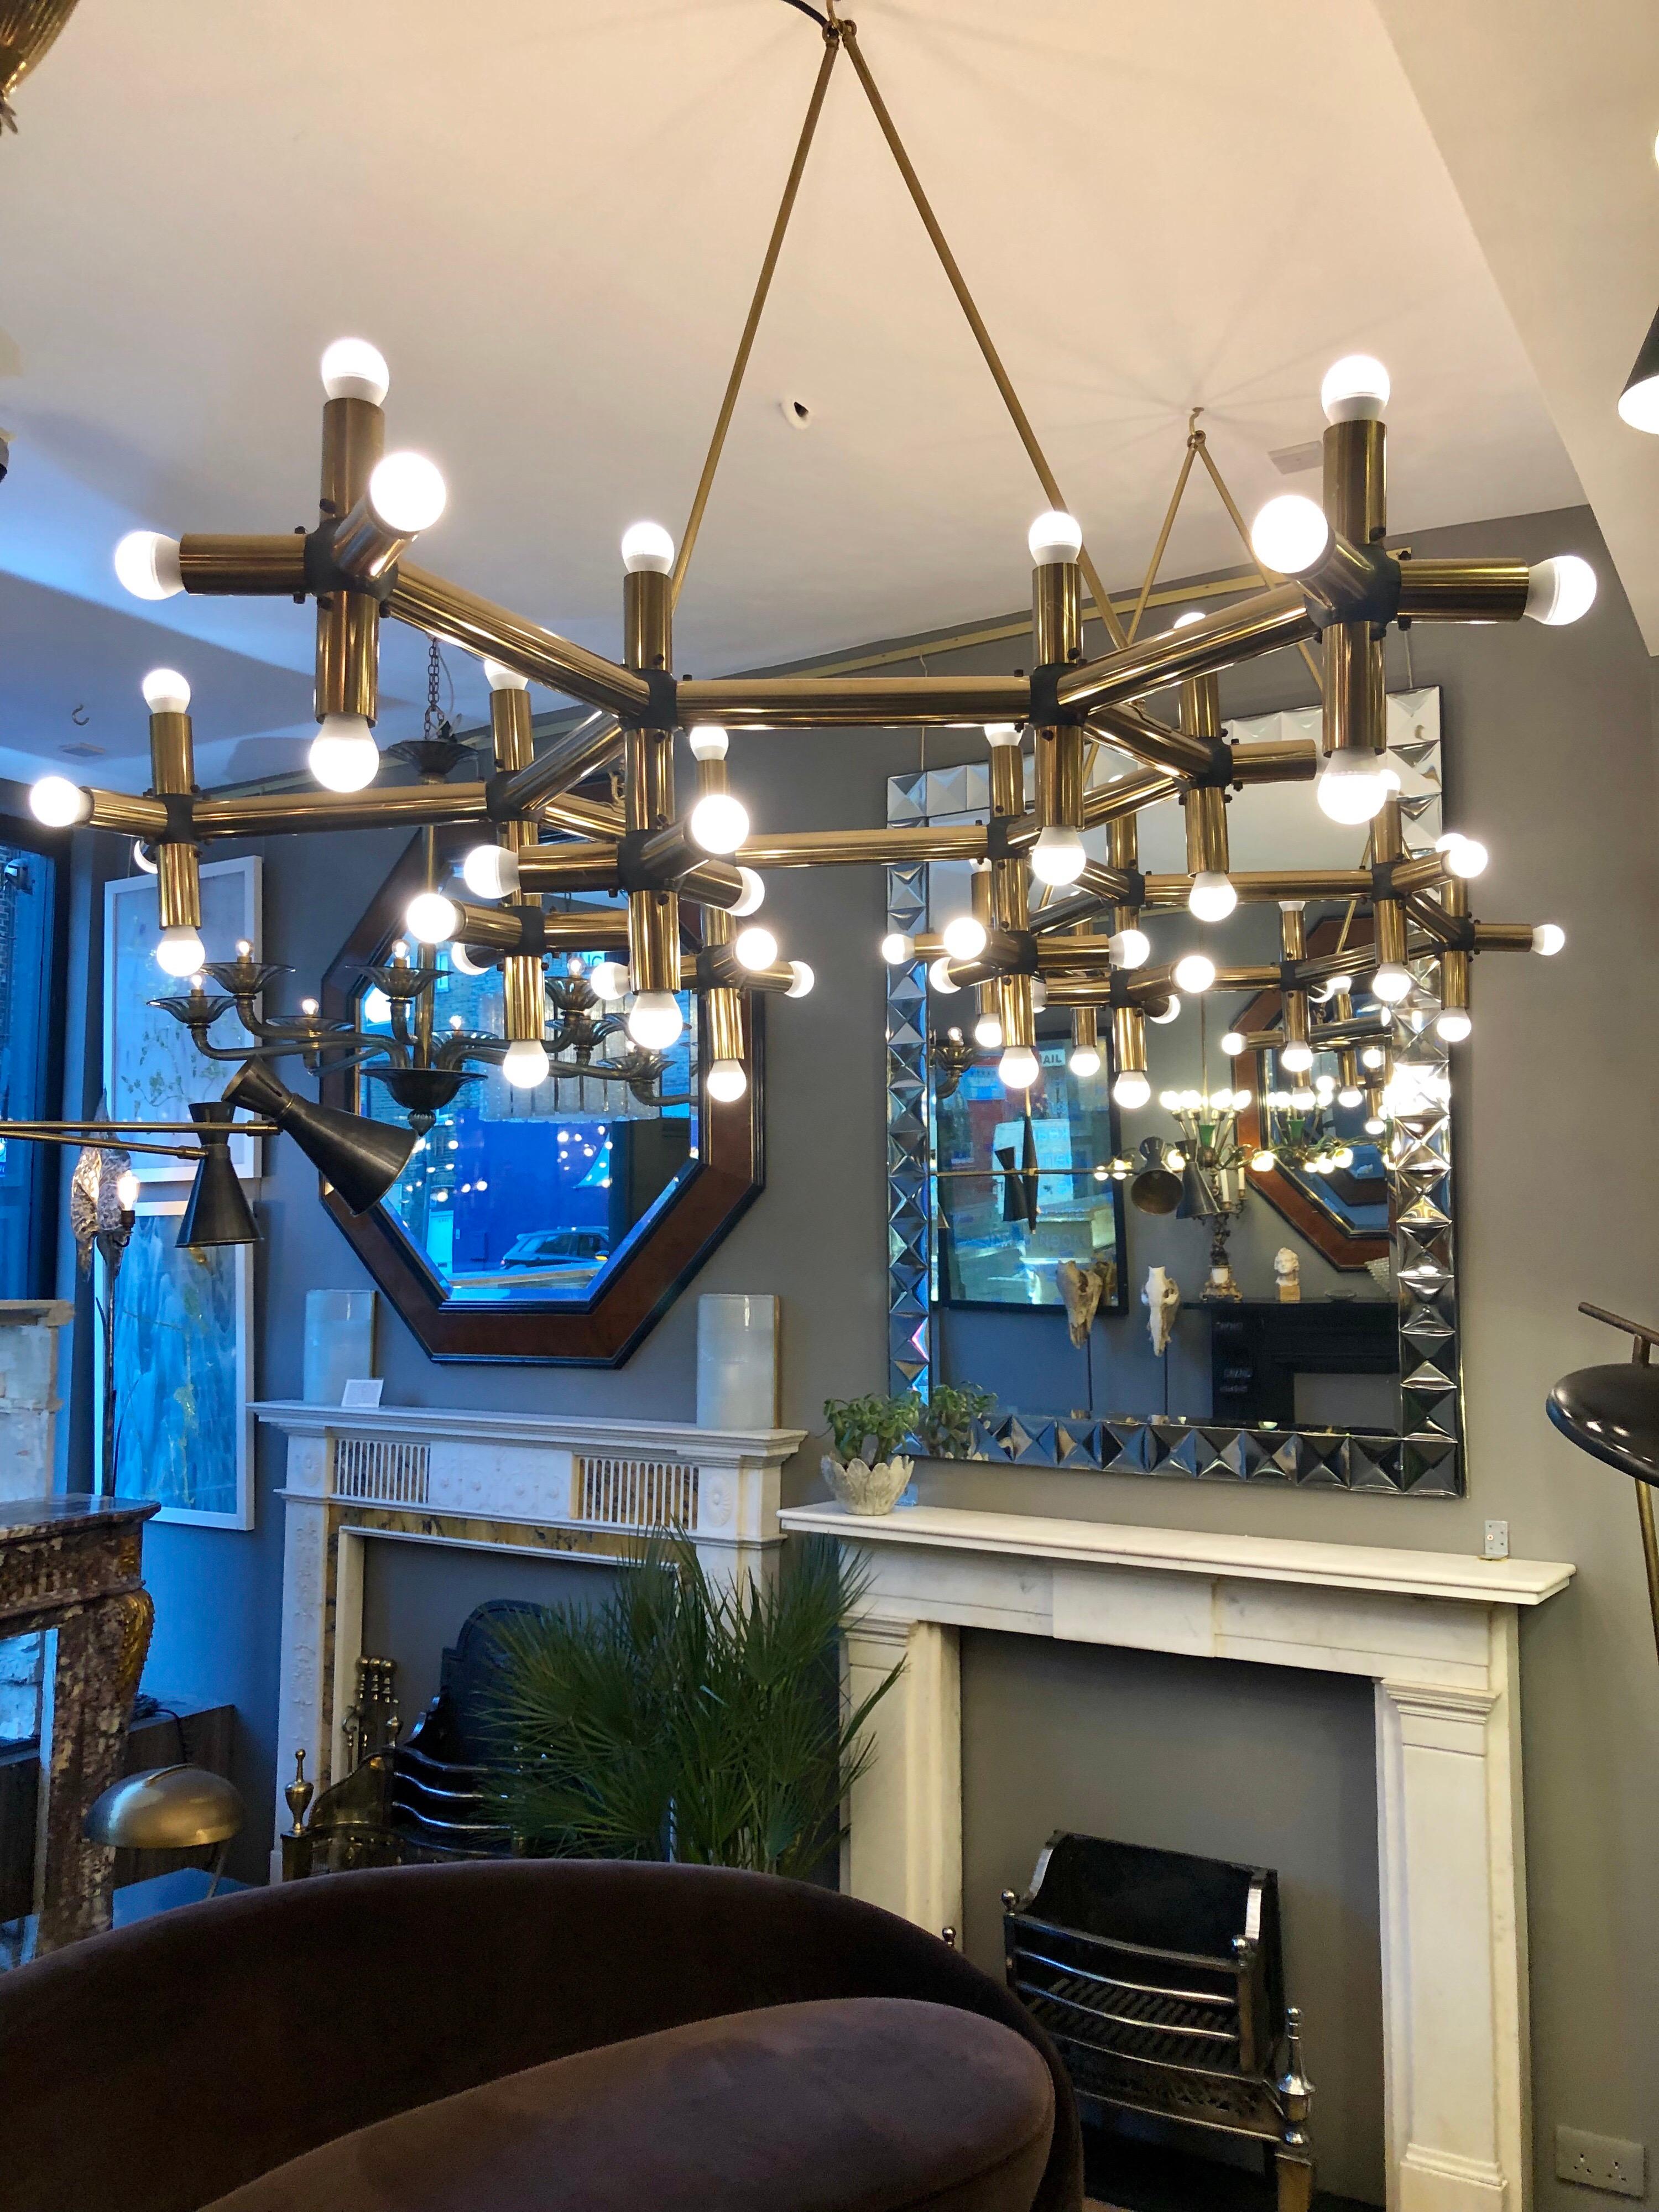 An unusual and very large pair of tubular geometrical “ lichtstruktur “ chandeliers in brass by Robert Haussmann. Having 54-light fittings in each light. Hung from the ceiling with brass matching hooked rods. Imported from Paris and installed in